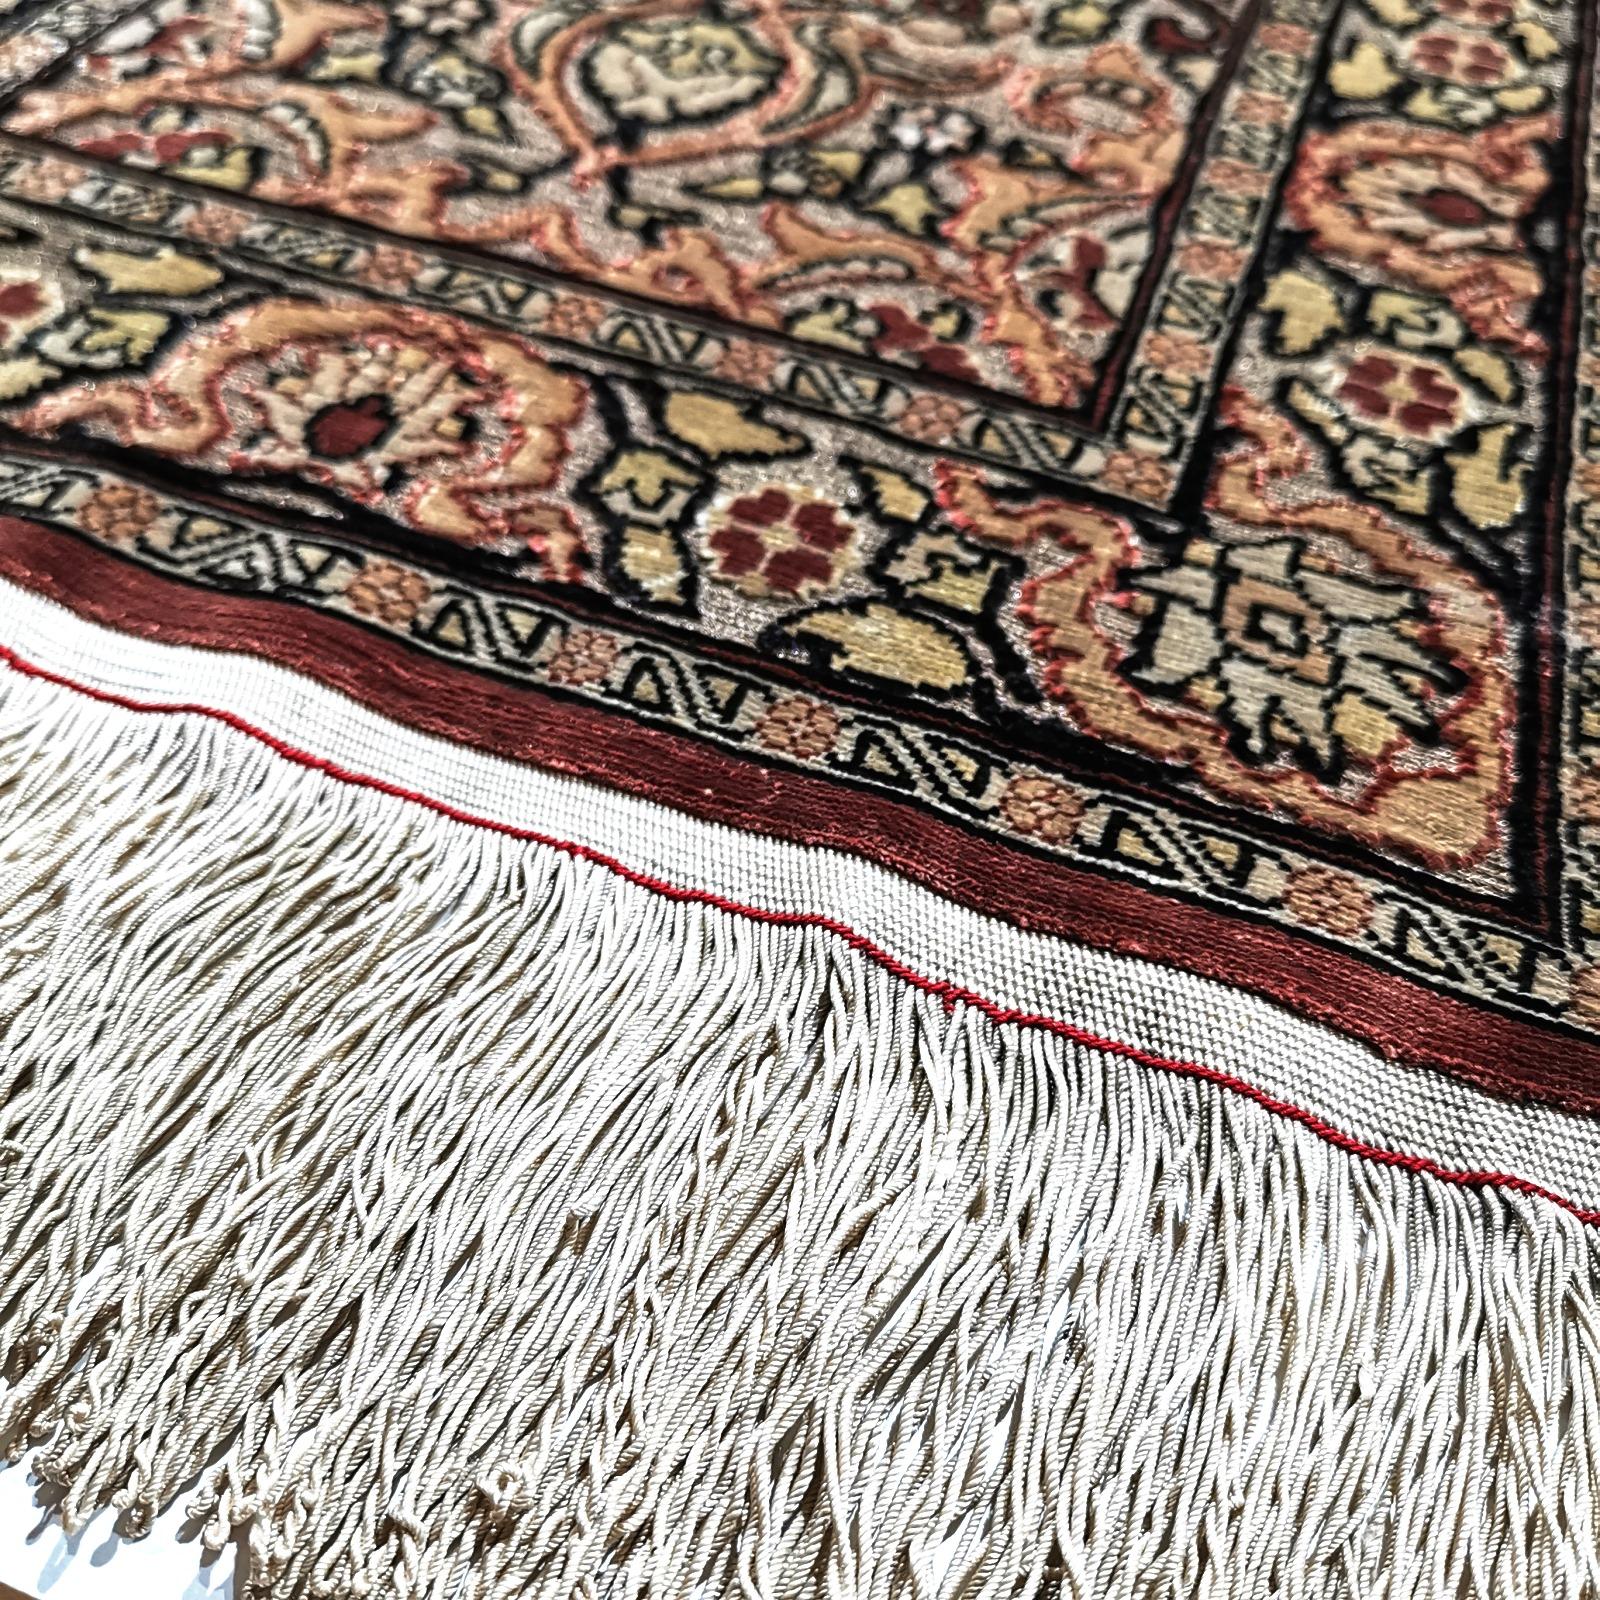 Very fine Turkish pure silk Hereke prayer rug. 

Turkish Hereke Souf silk rugs are the most exclusive and highly priced rugs of all silk rugs made. The raw material is exquisite original Bursa silk made from Mulberry silk worms, dyed with